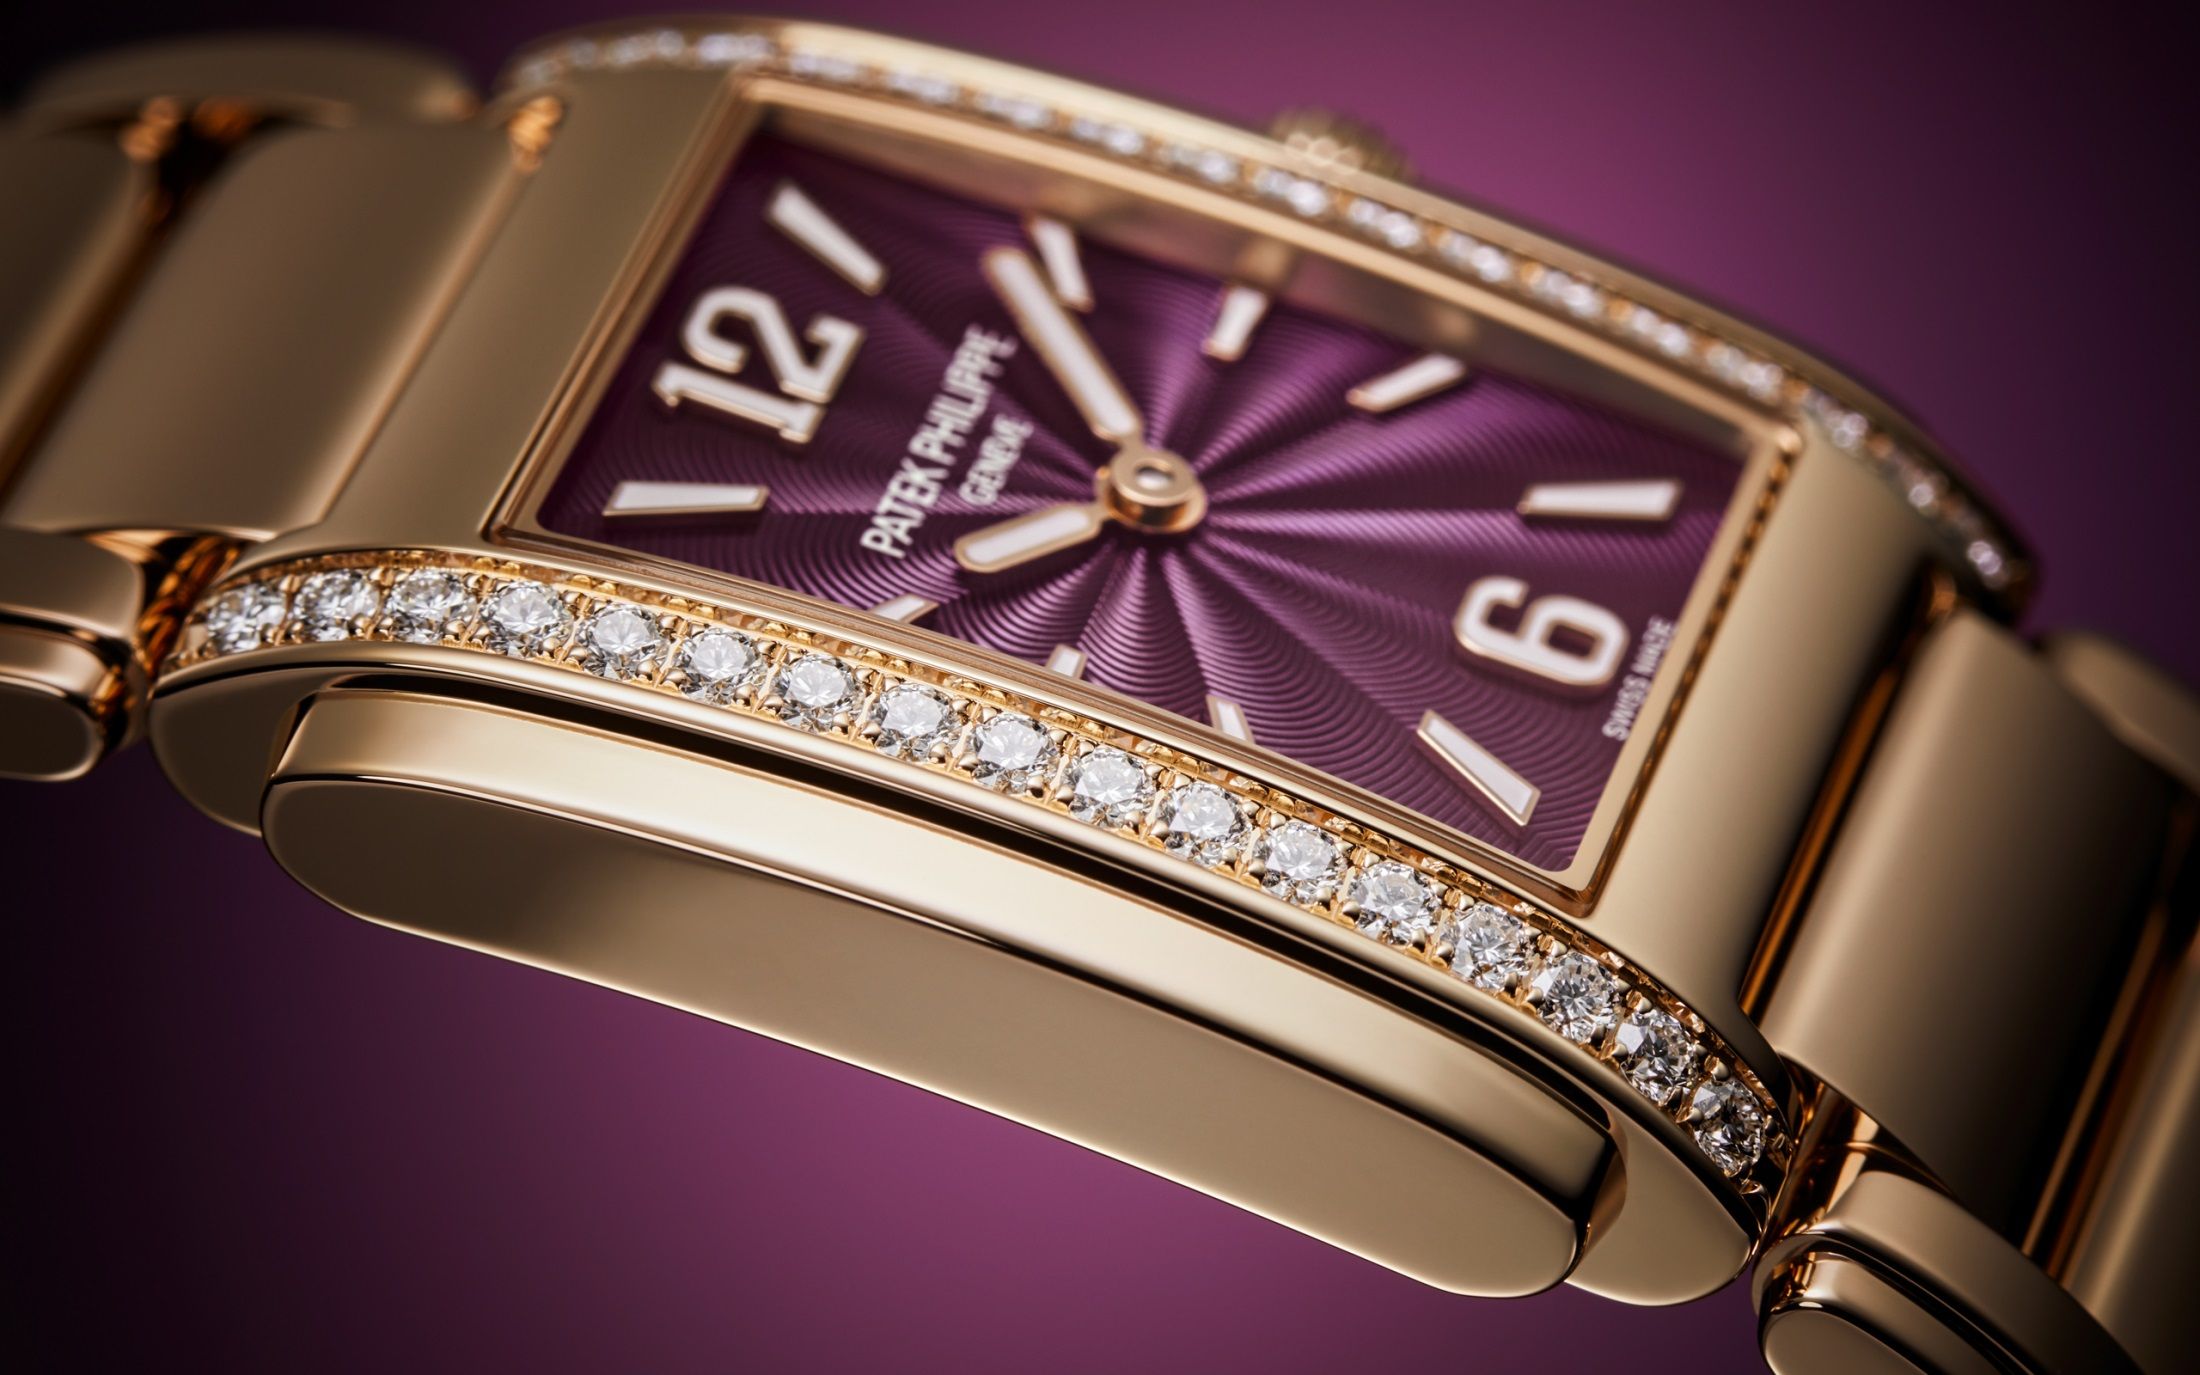 The case sides are embellished with 0.63 carat of diamonds